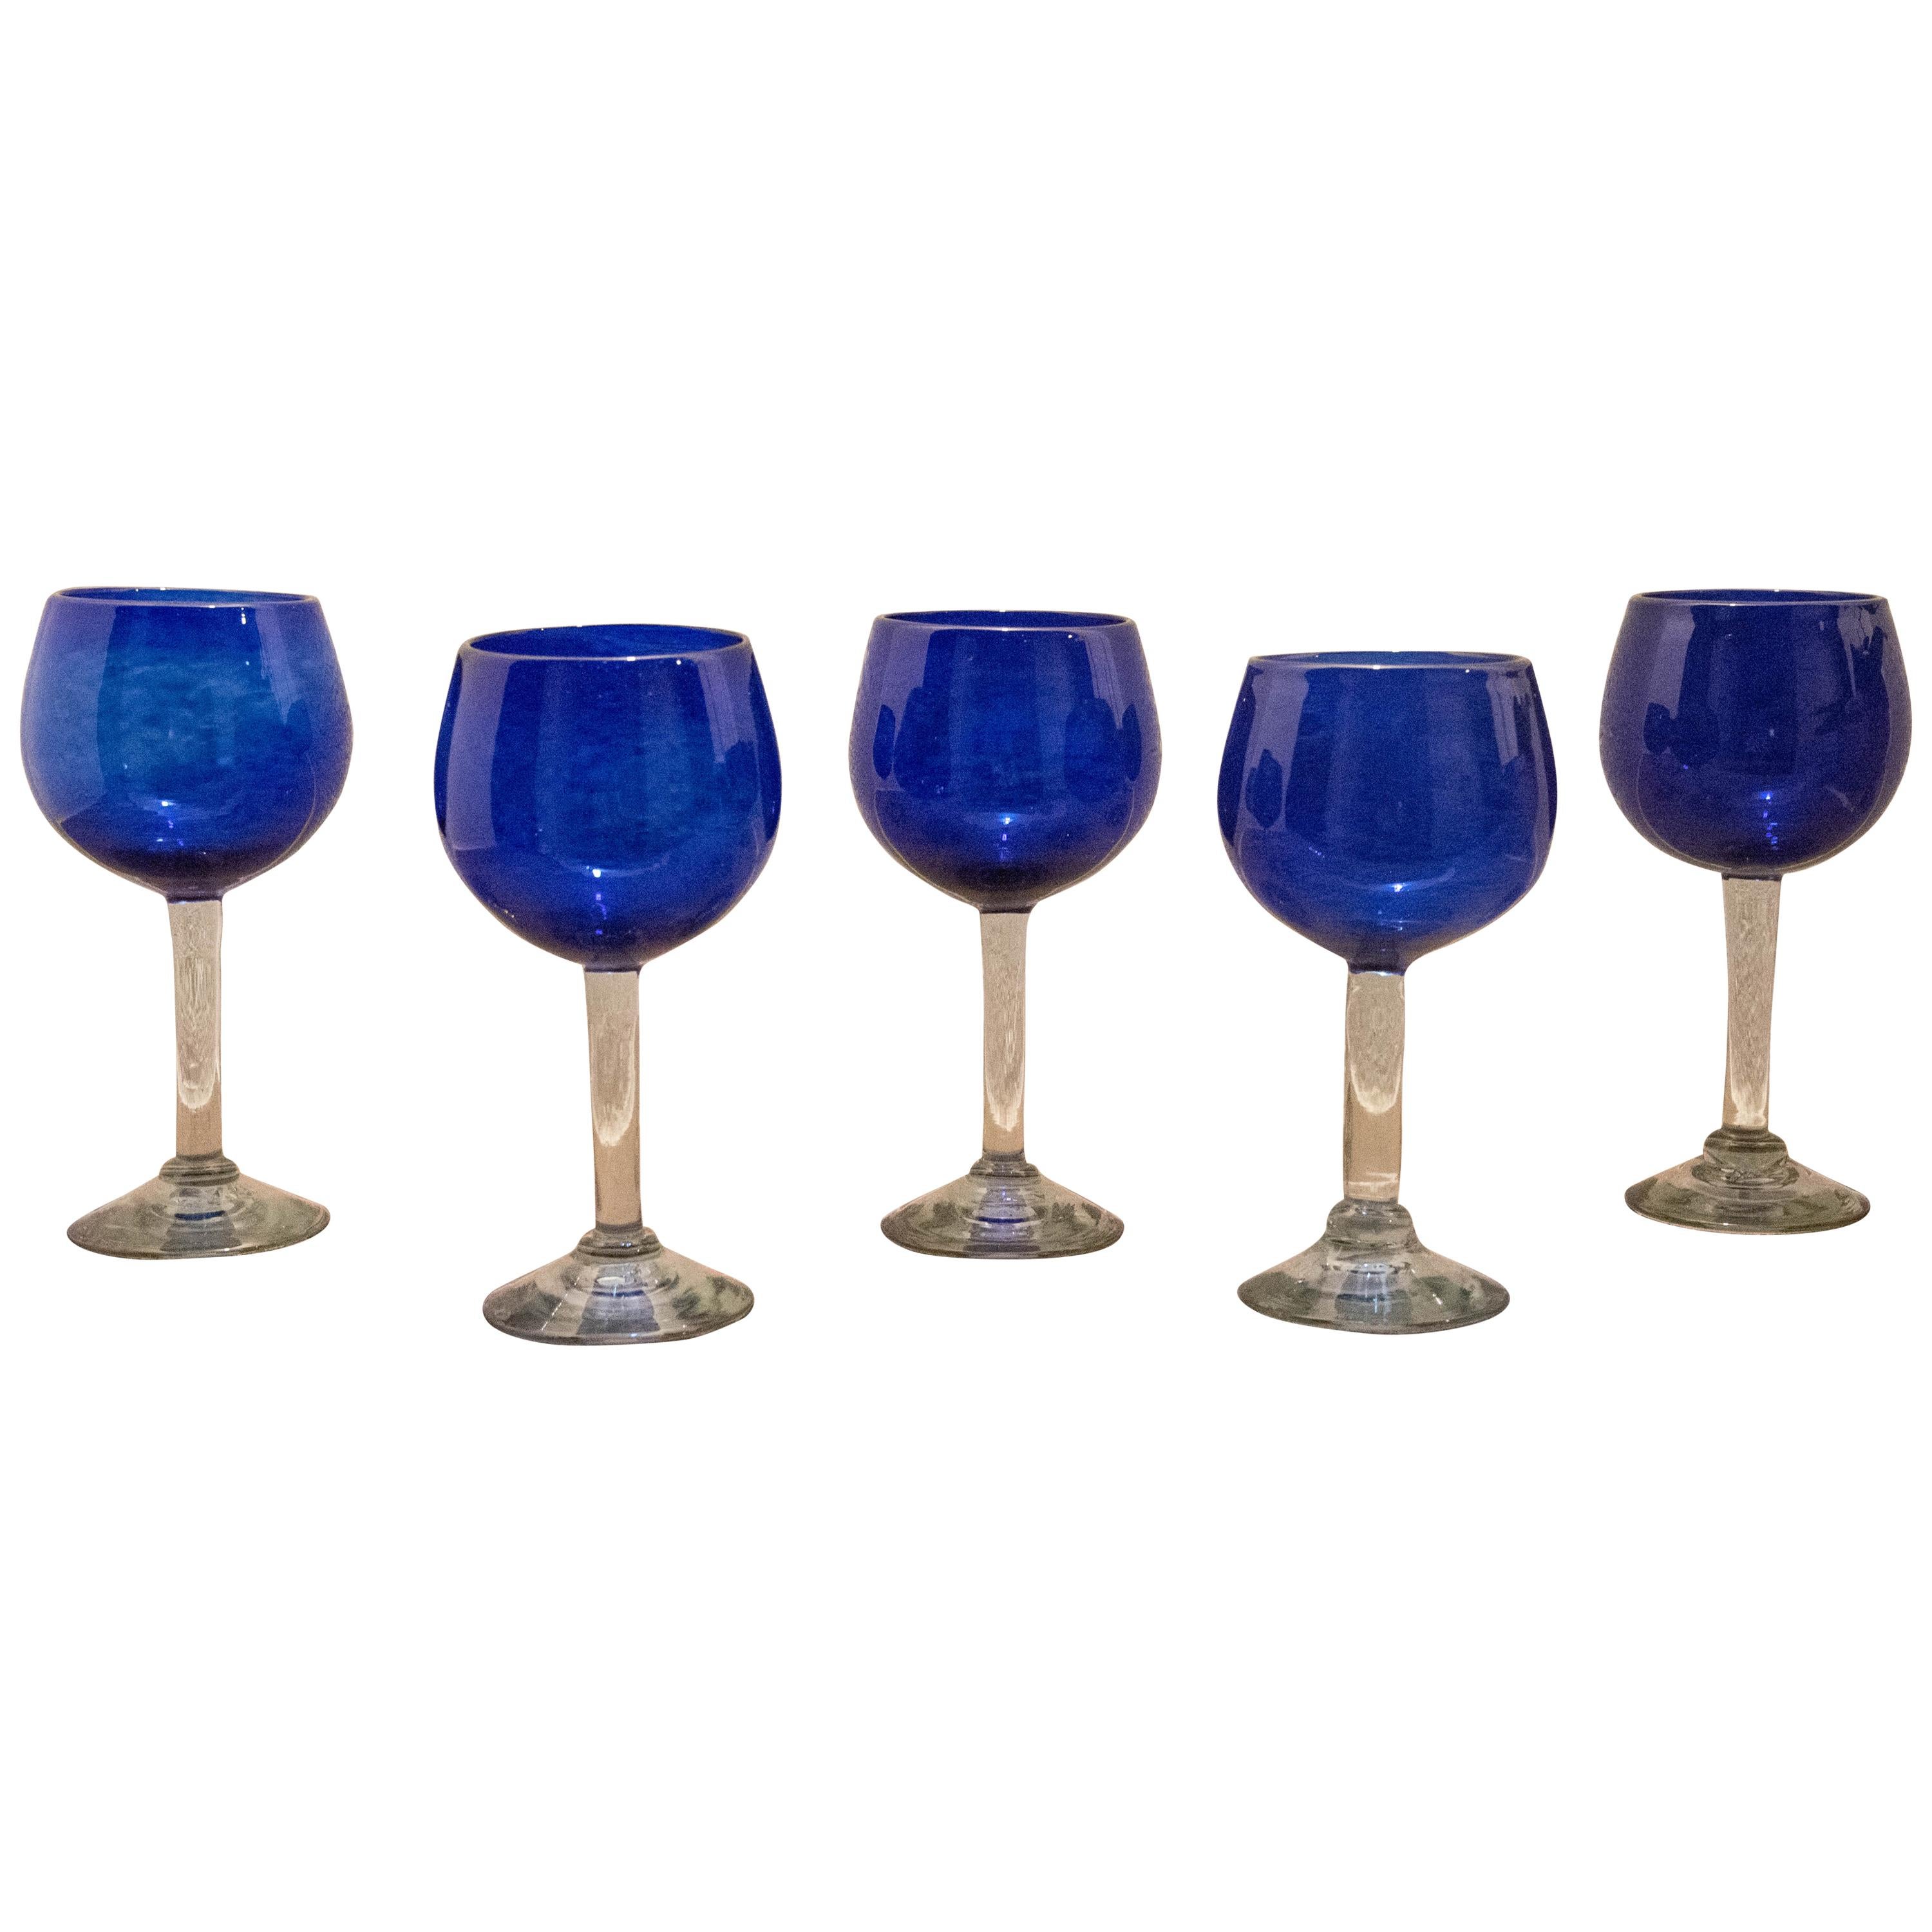 MORE AVAILABLE Beautiful Set of 4 Cobalt Blue Blown Glass Water Goblets 